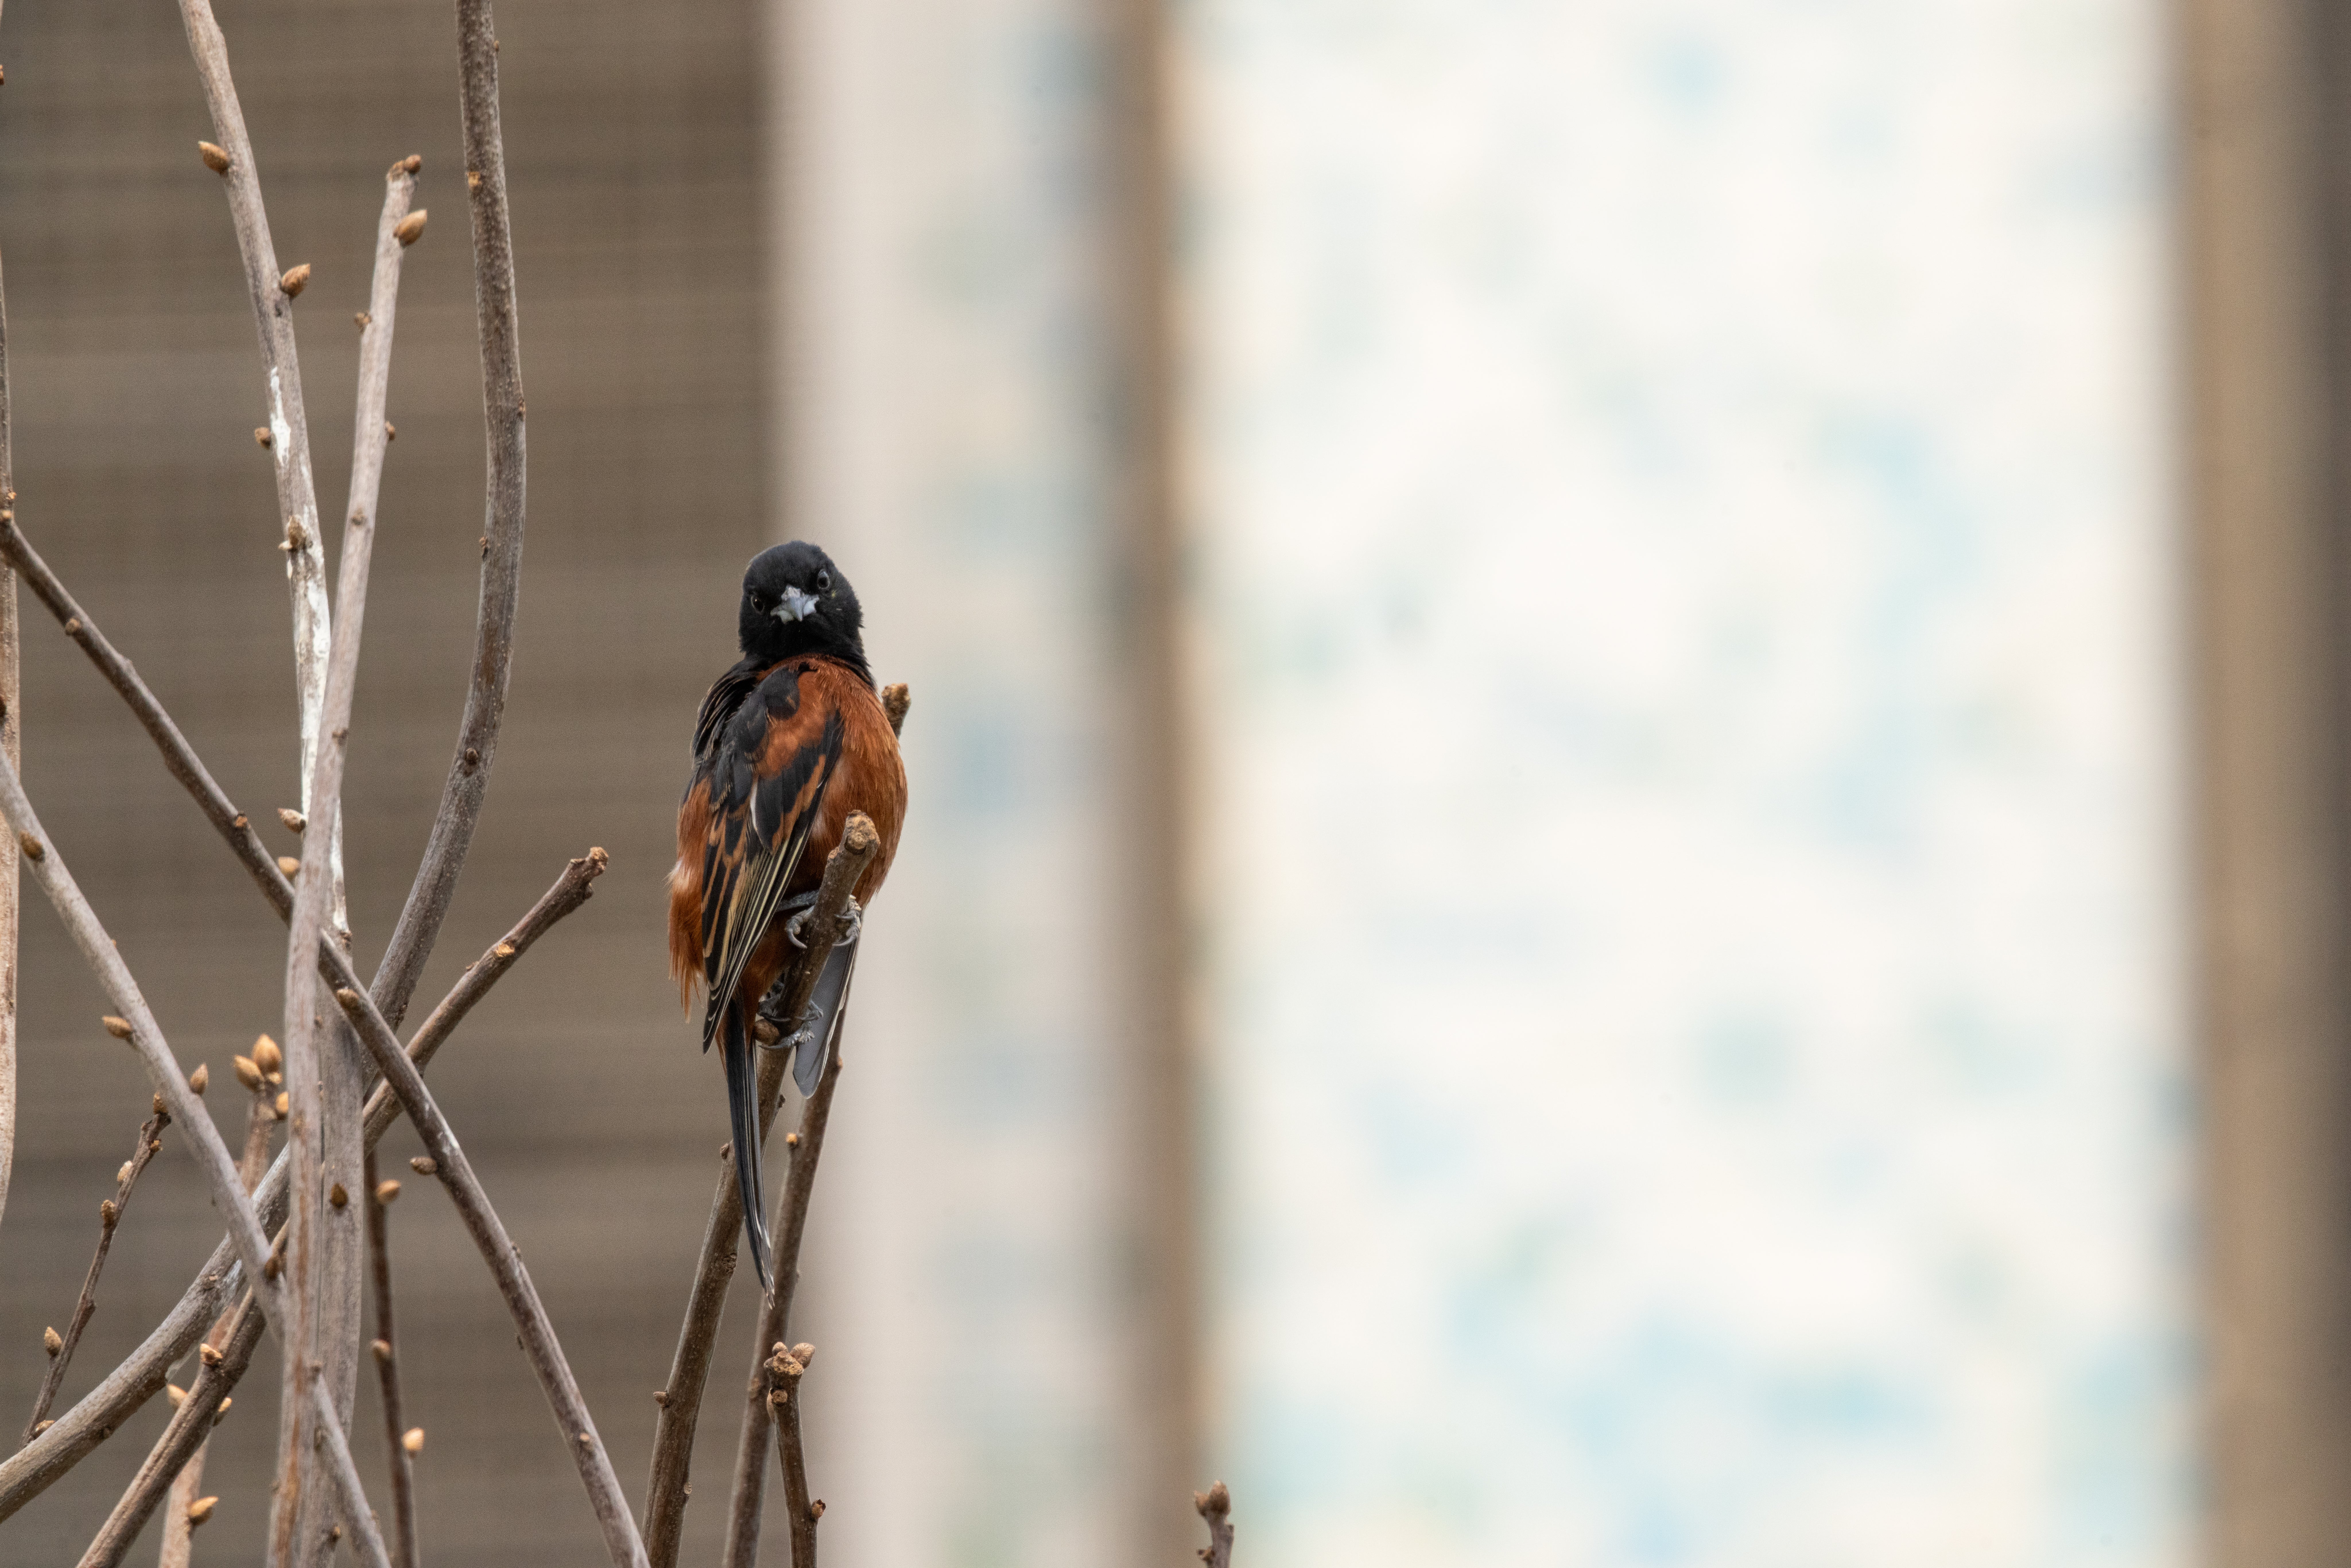 An orchard oriole rests on a branch in the Bird Friendly Coffee Farm aviary.